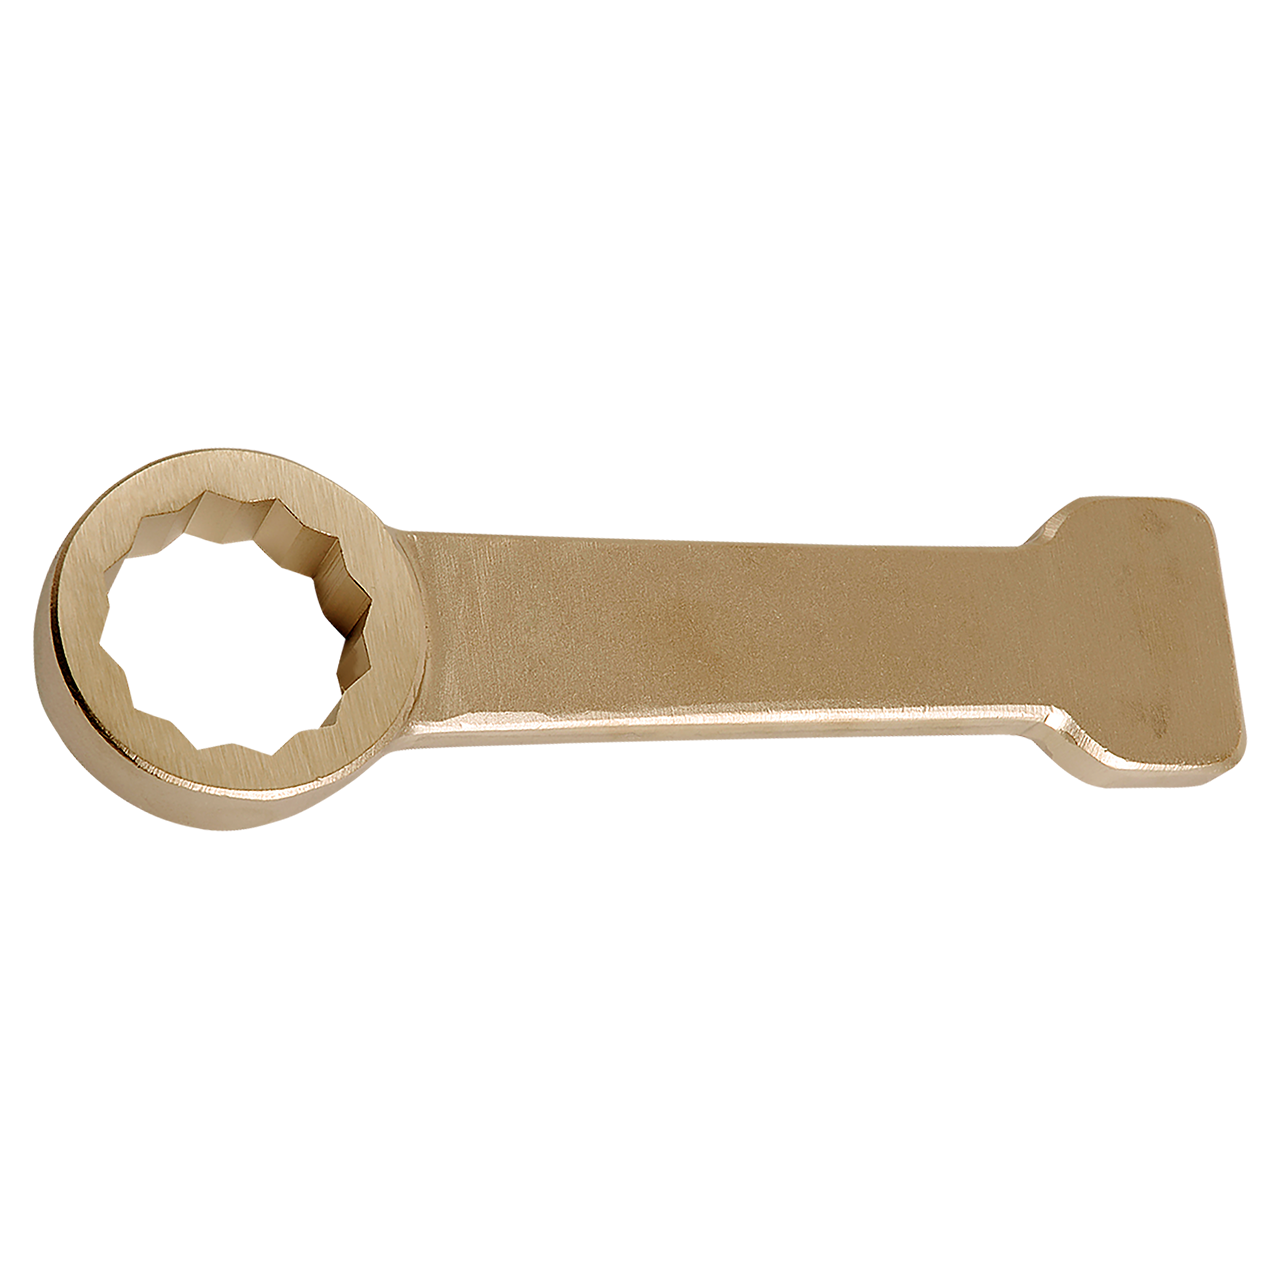 Slugging Ring Wrench, spark free